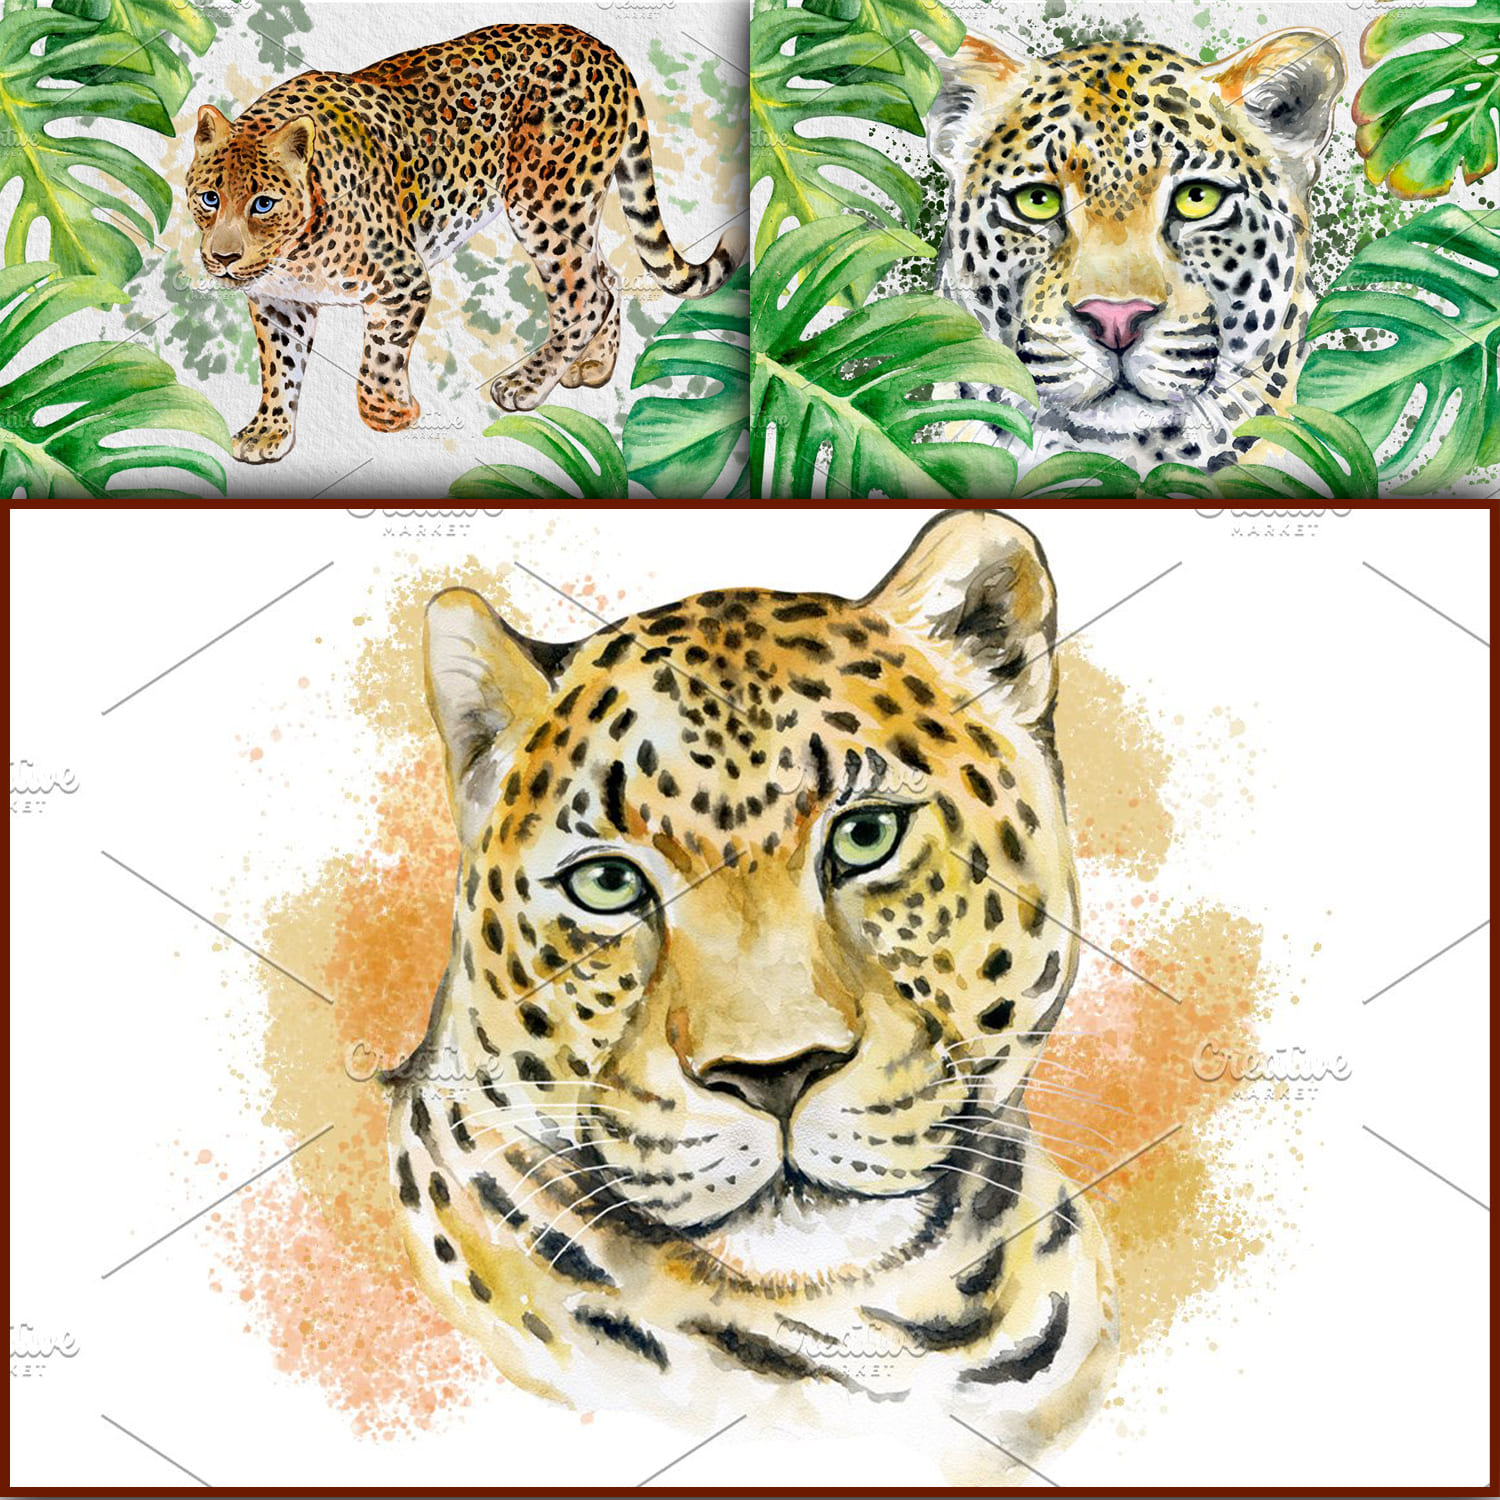 Watercolor. Leopards. Wild cats cover.